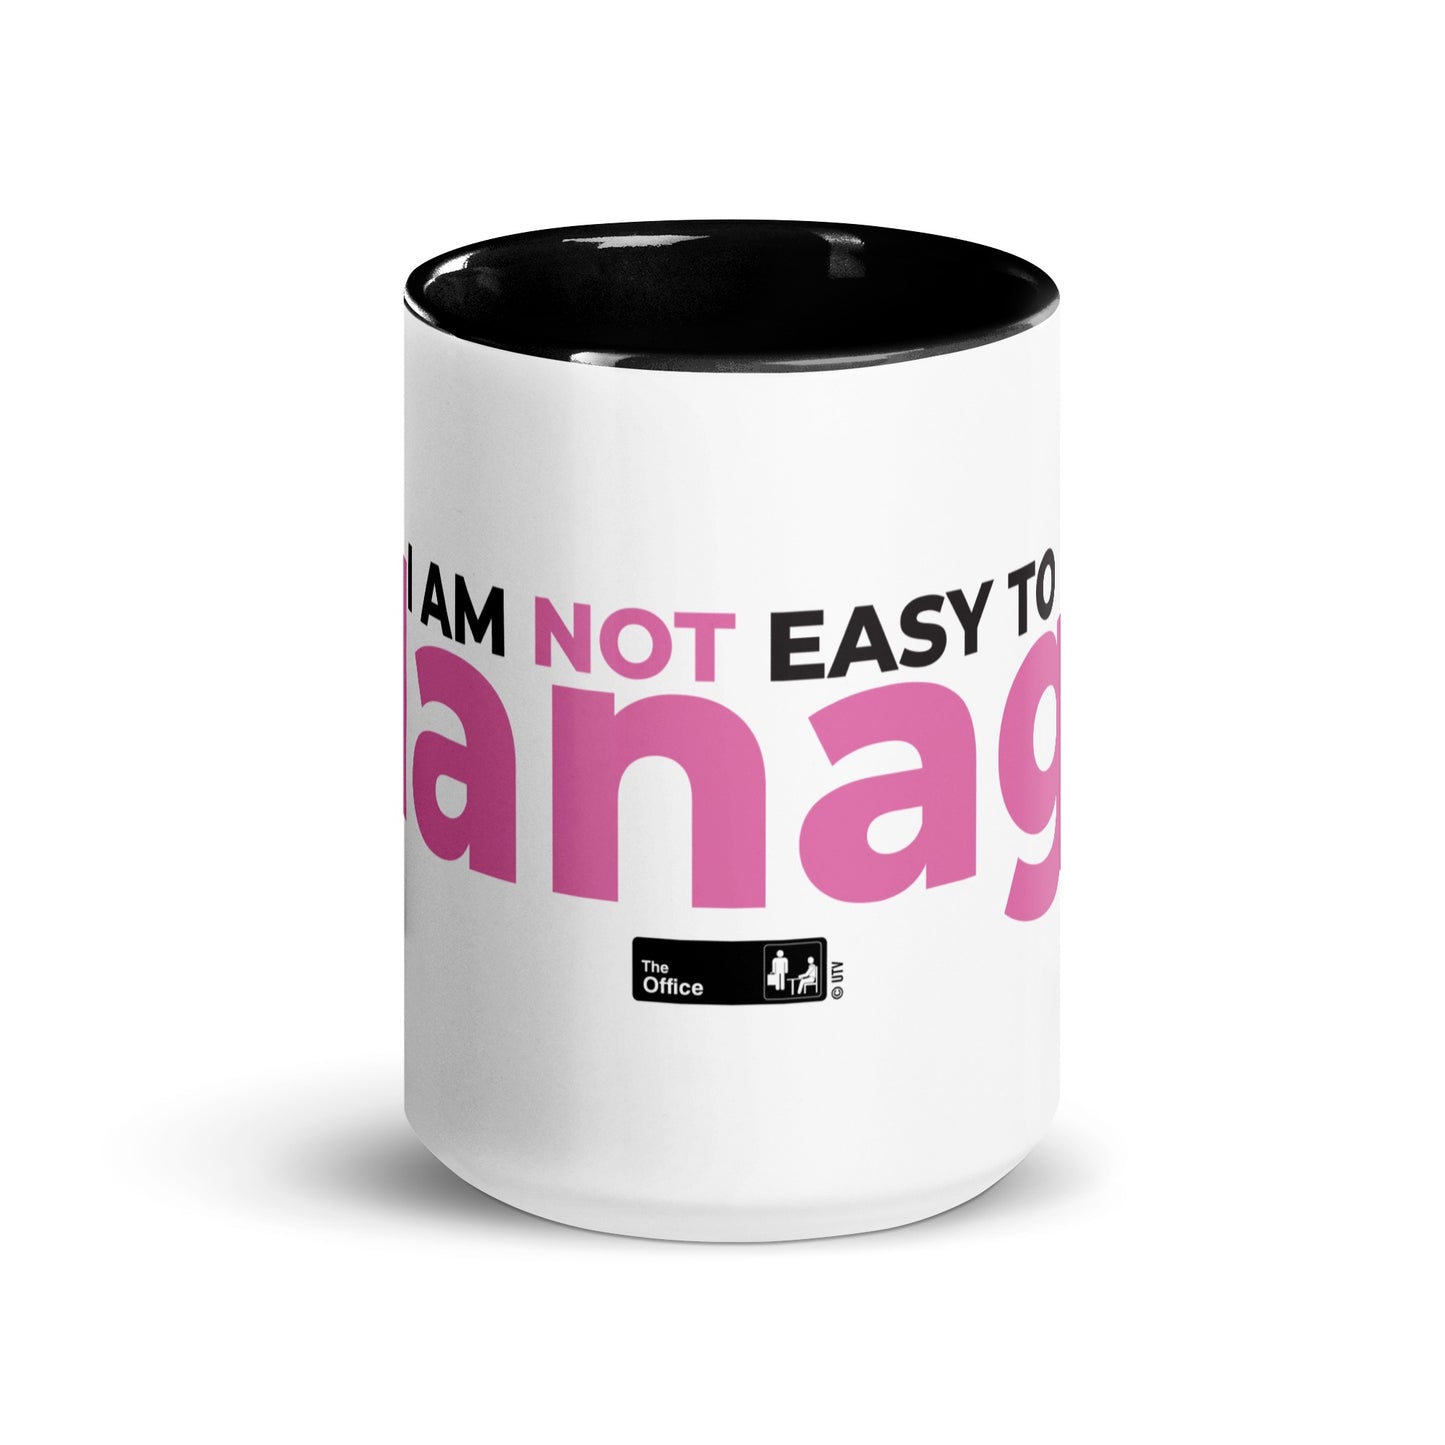 The Office I Am Not Easy to Manage Mug